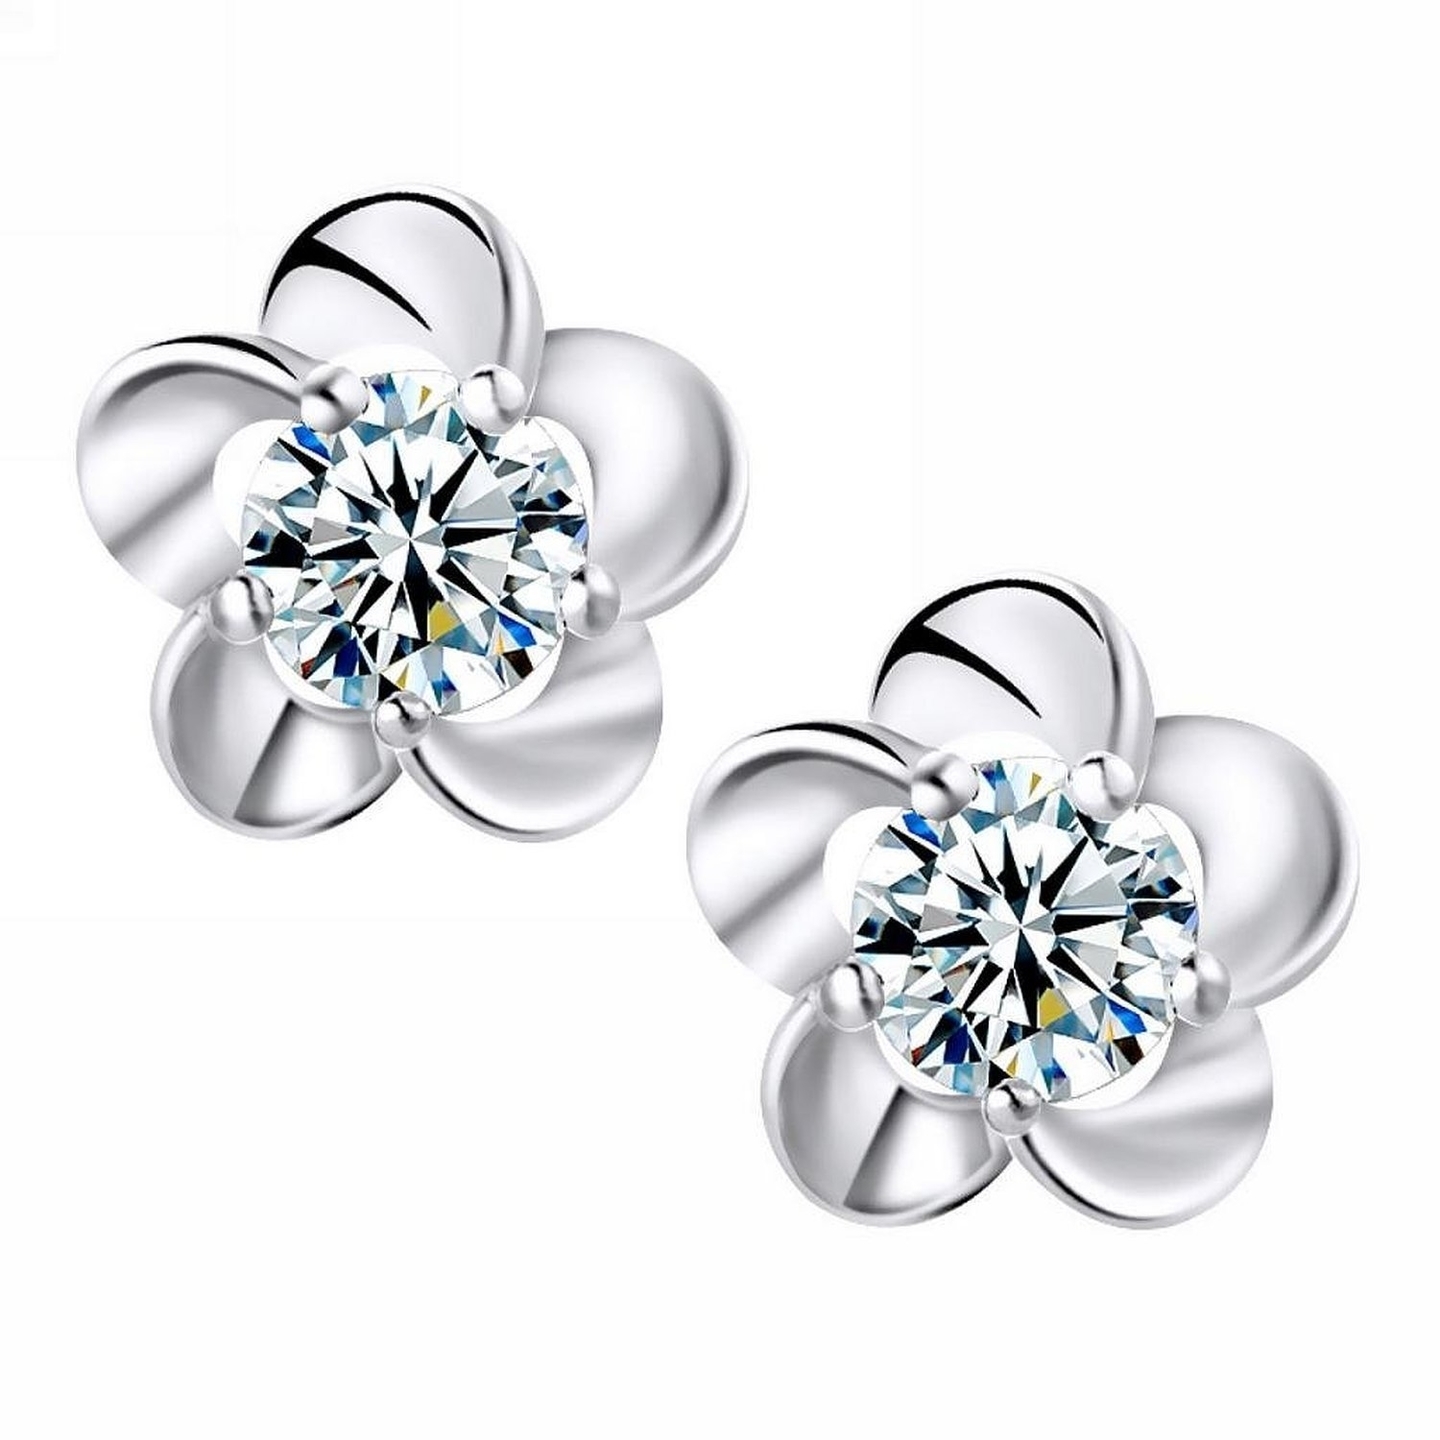 Ashiana 925 Sterling-Silver and CZ Plum Blossom Stud Earring for Women Silver